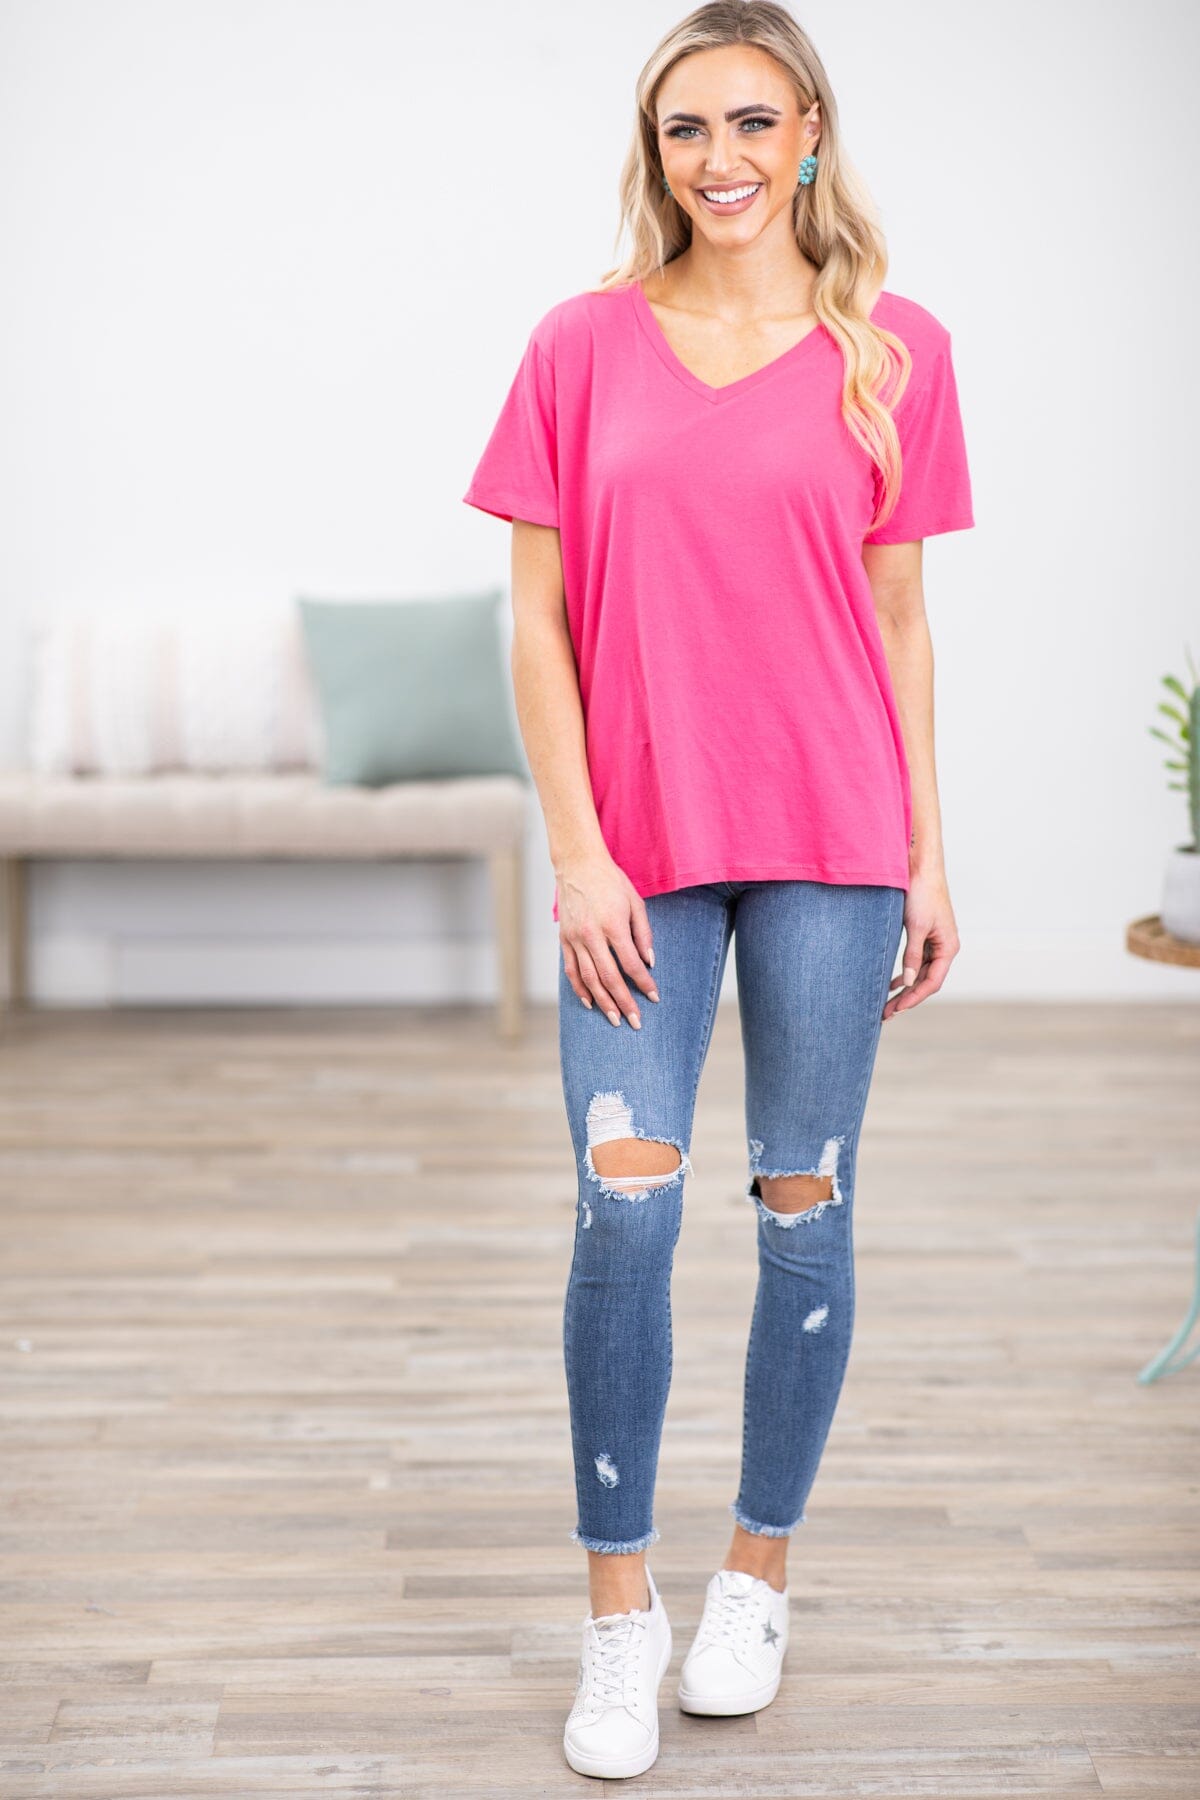 Hot Pink V-Neck Boyfriend Fit Tee - Filly Flair